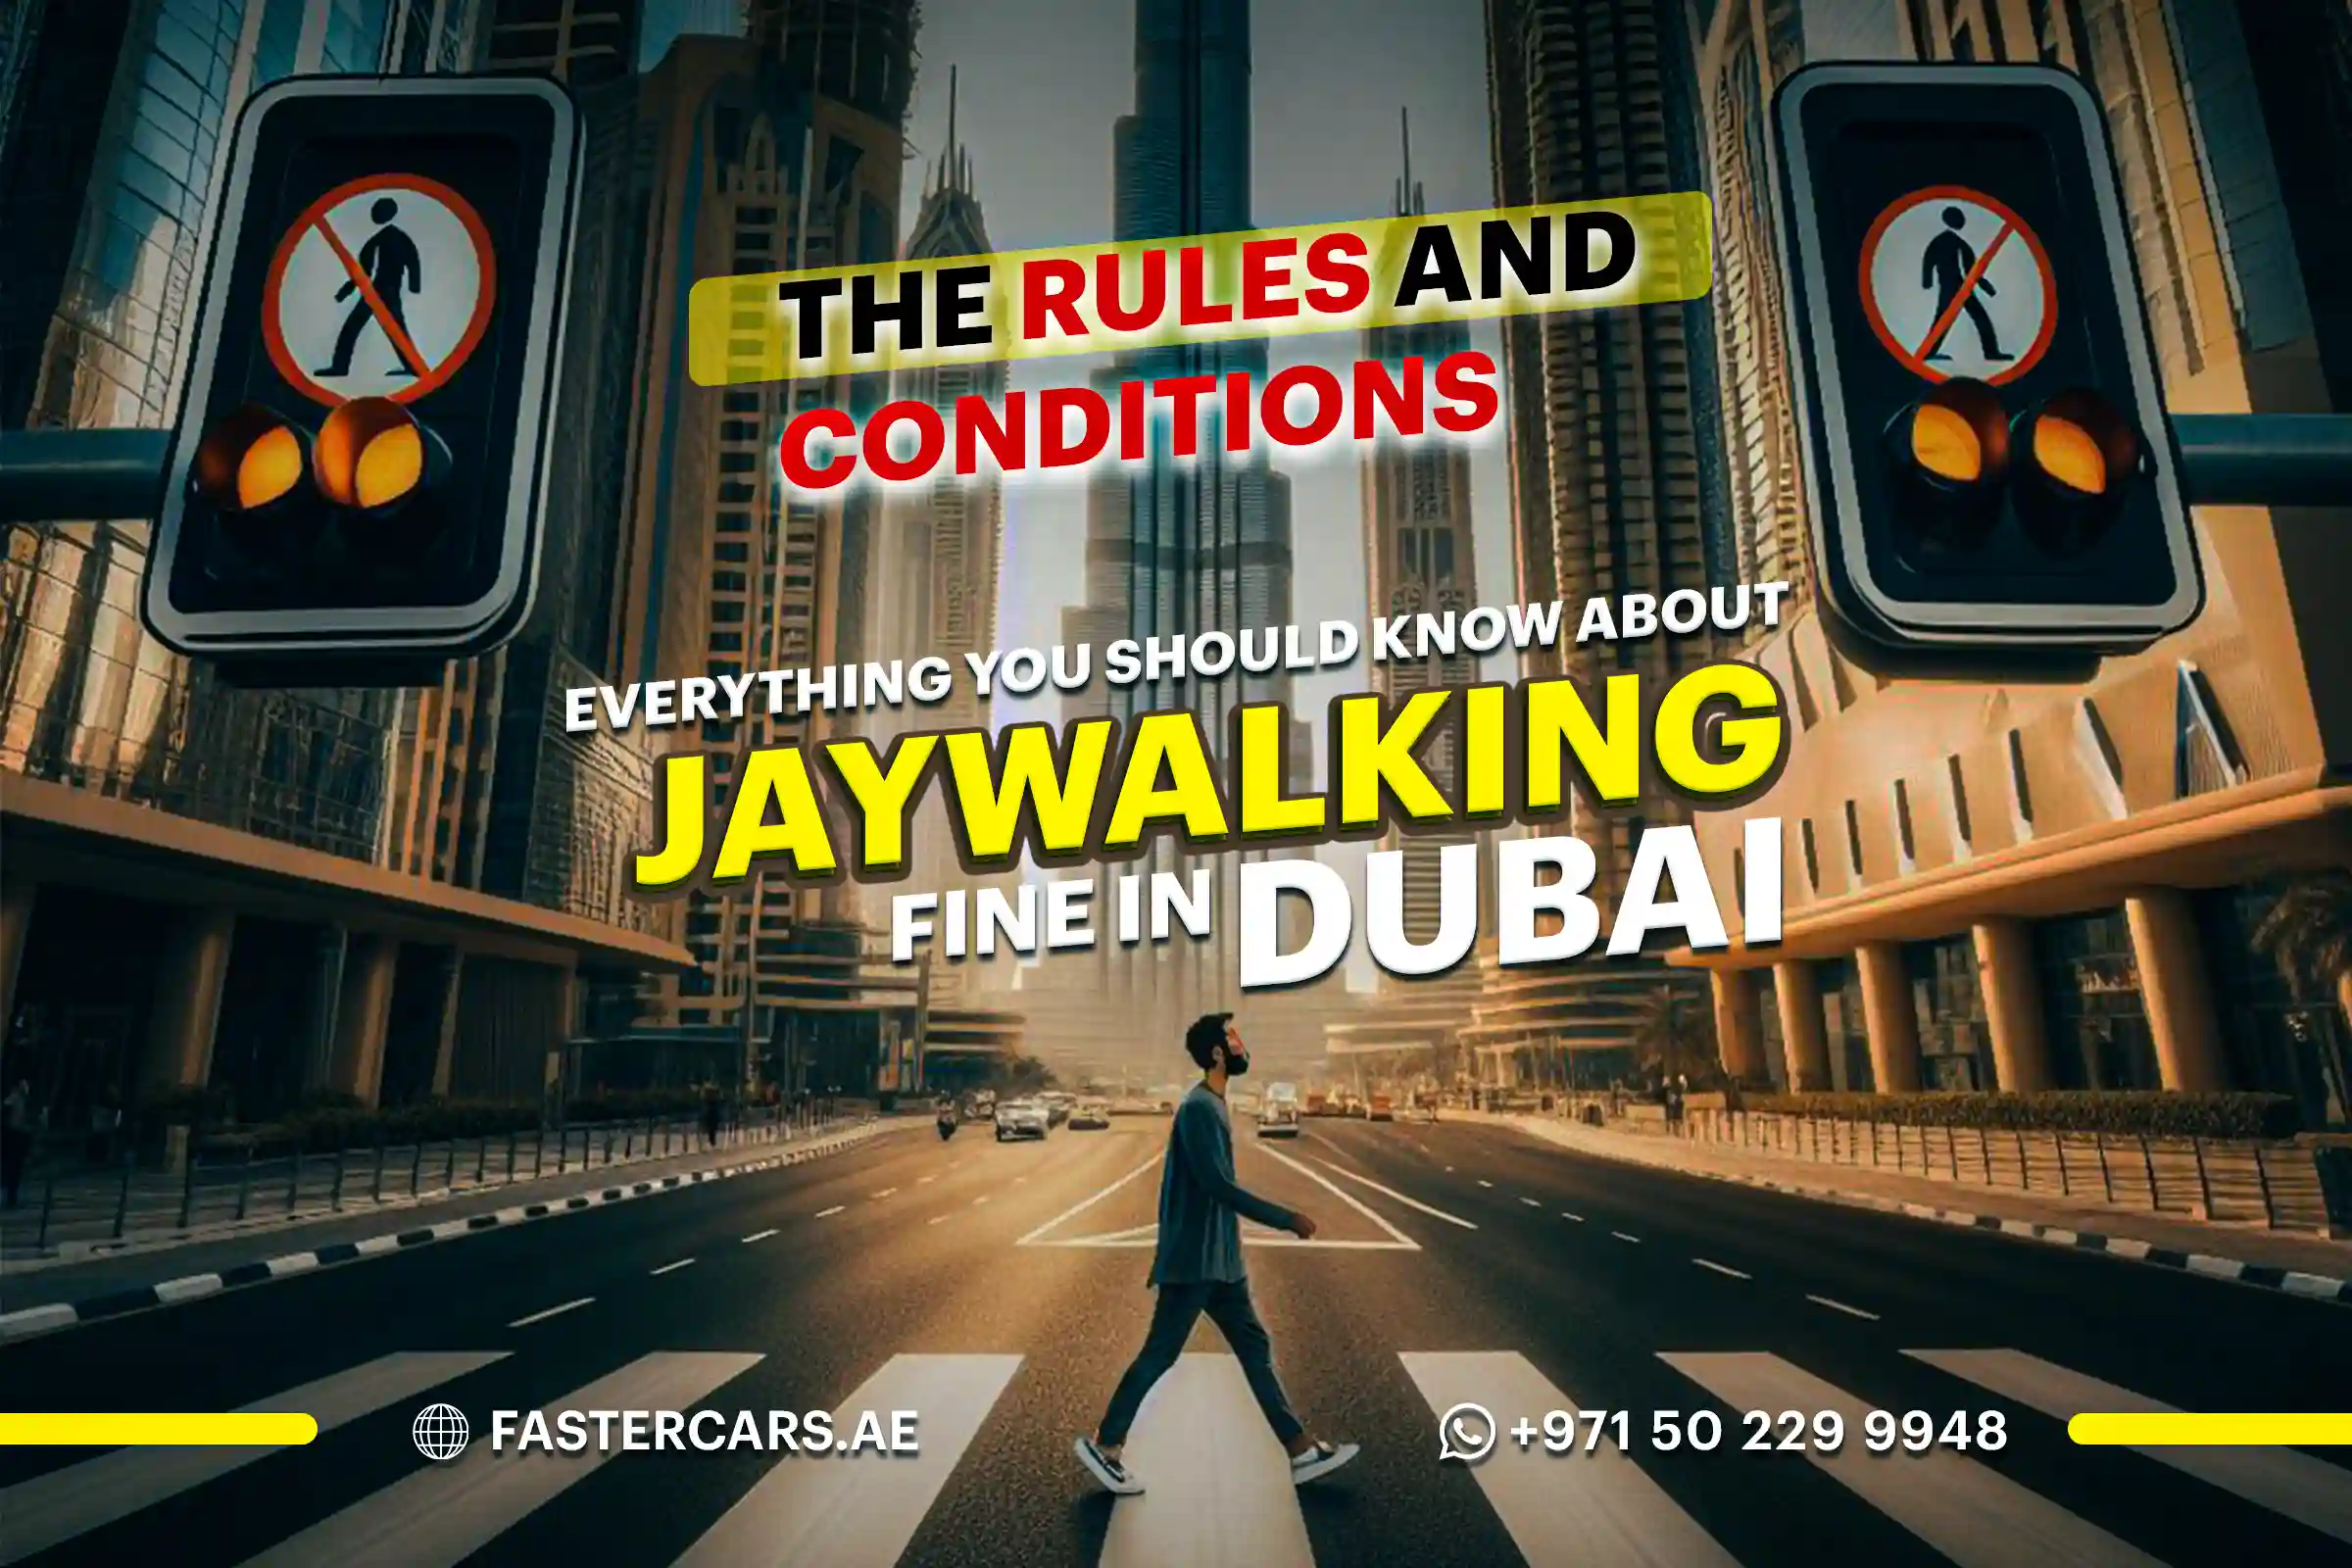 Everything You Should Know About Jaywalking Fine in Dubai